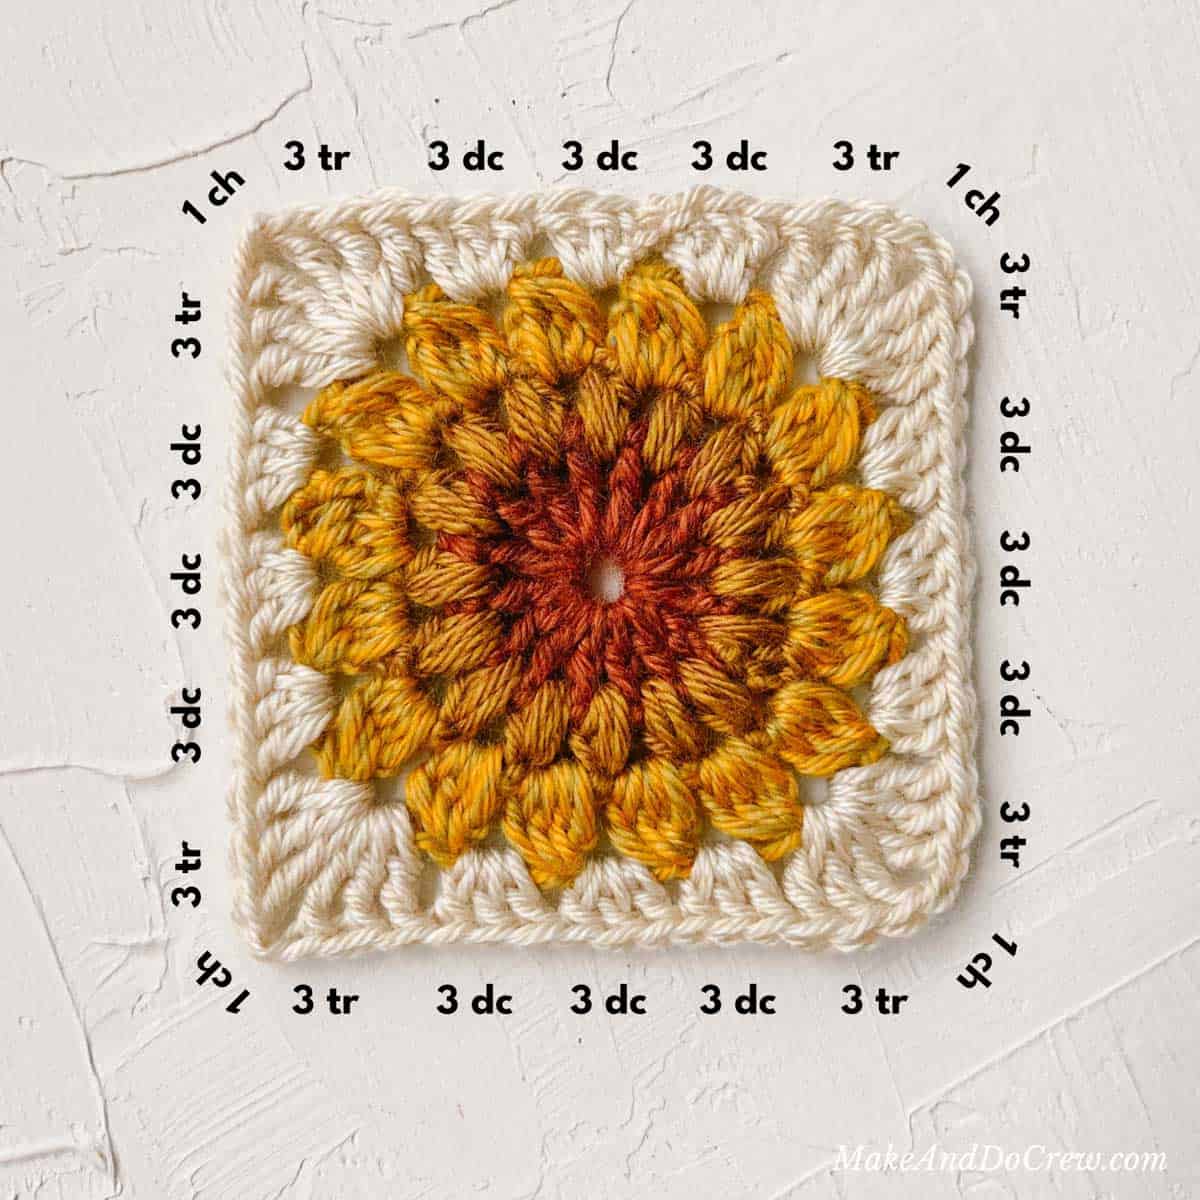 Sunflower granny square diagram showing what stitches to use.